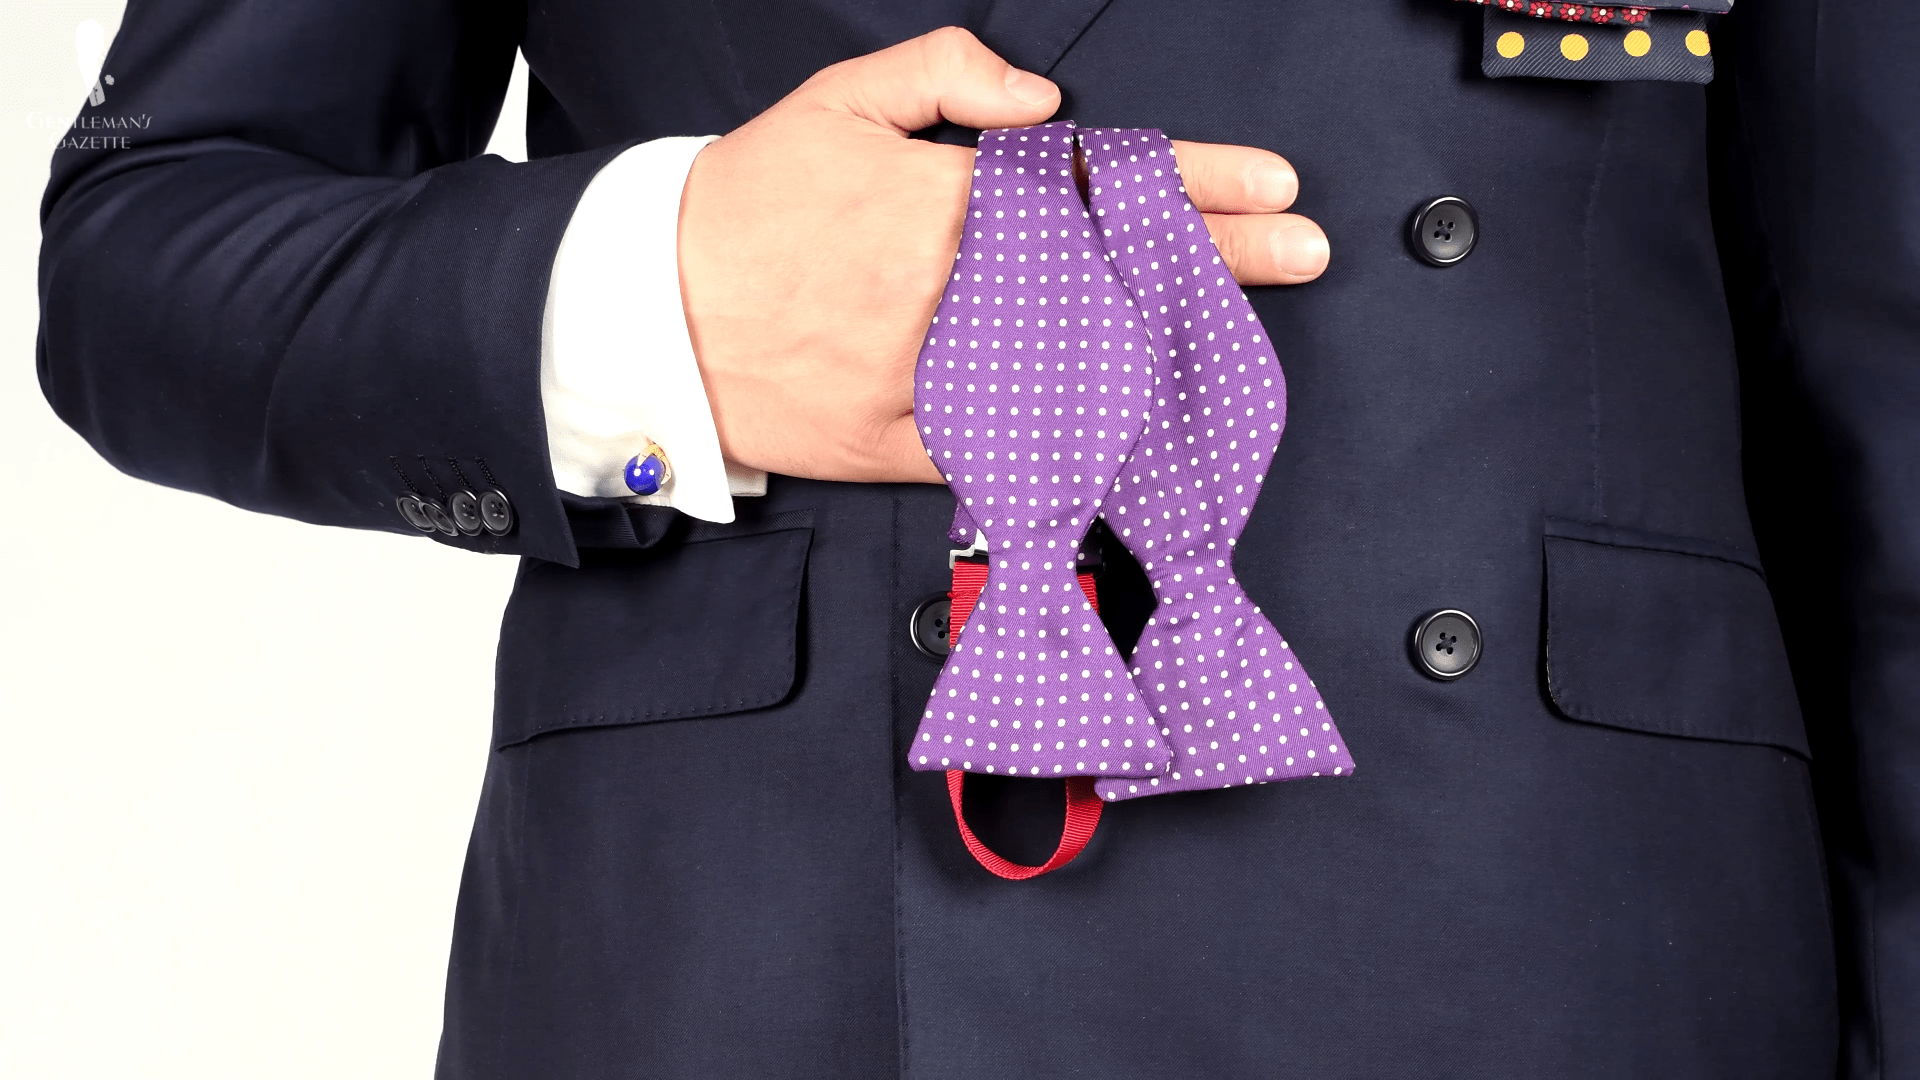 Ties that go with purple shirts